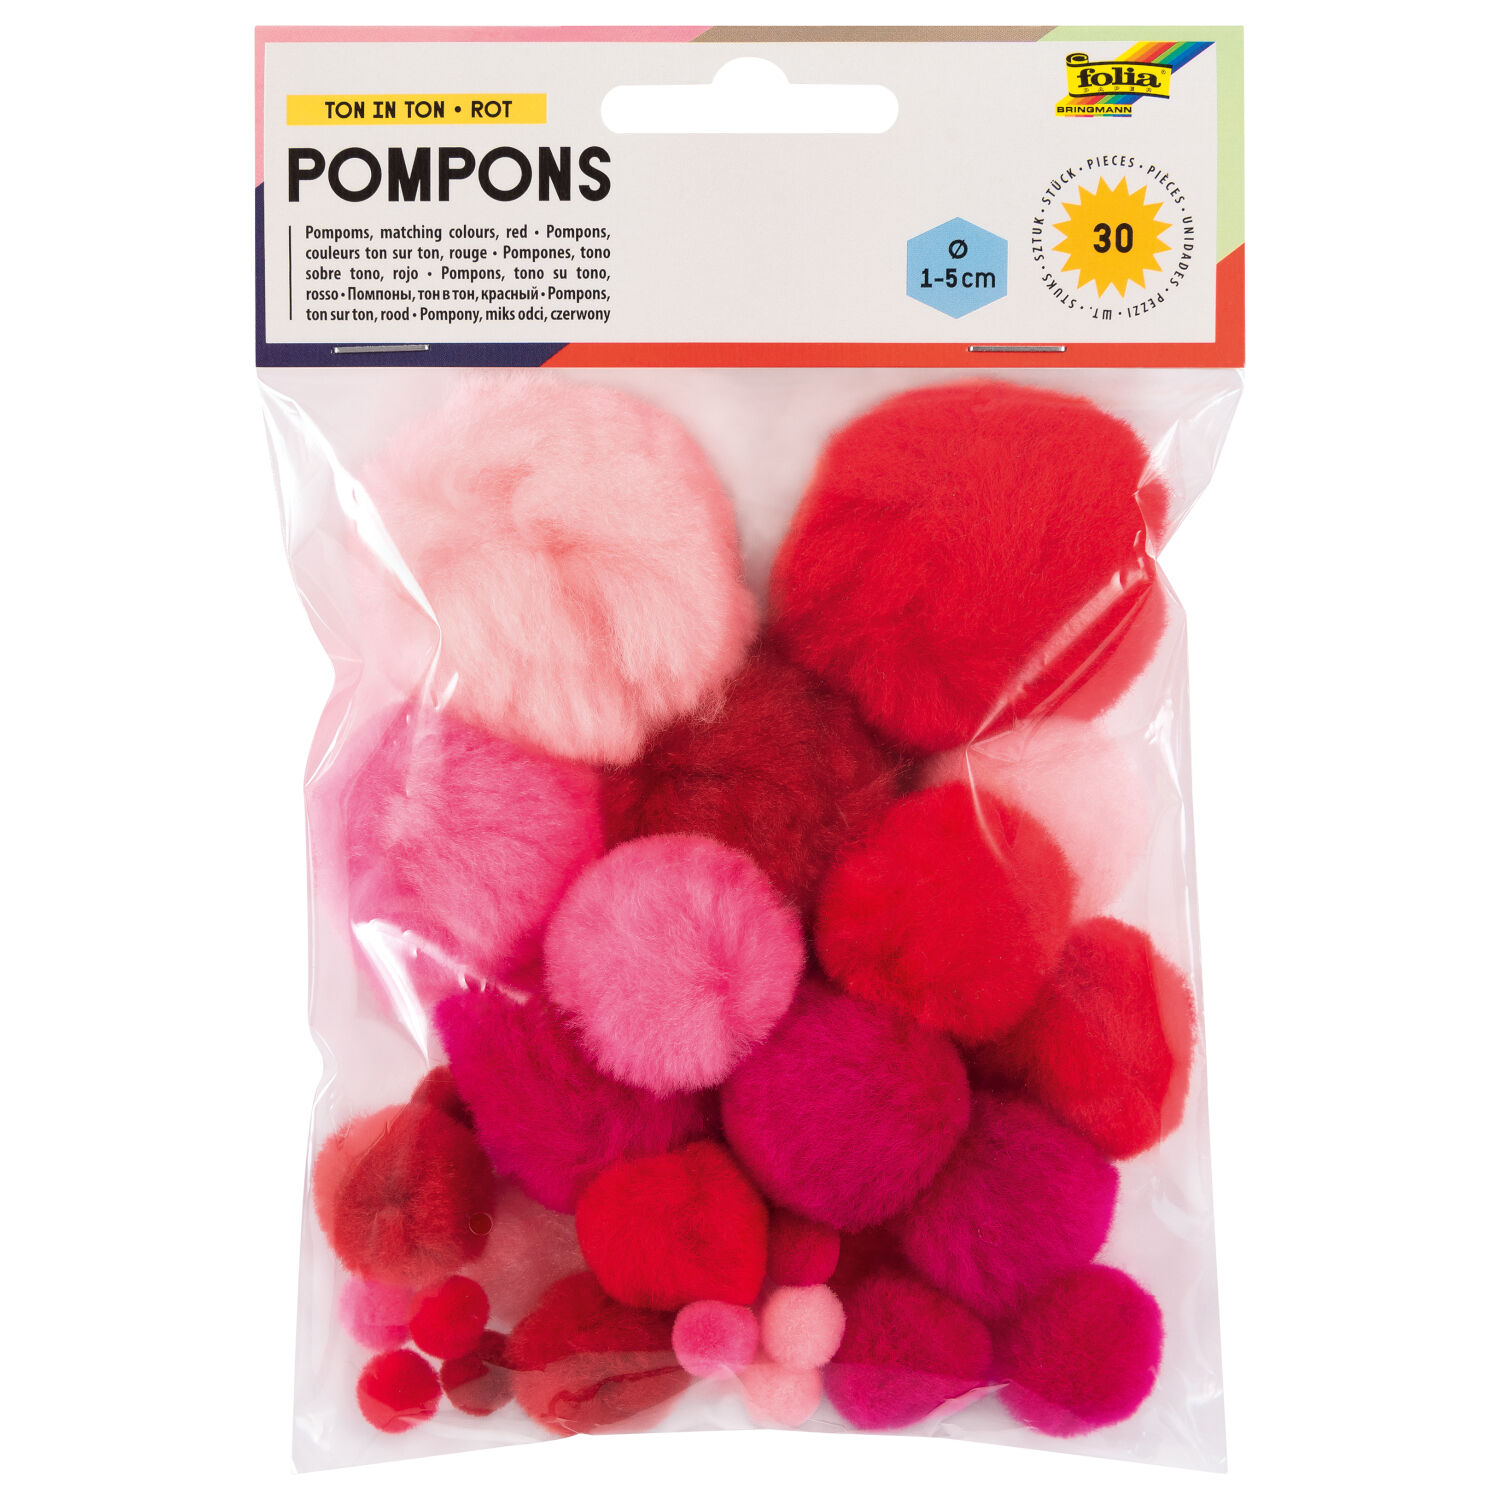 Pompons, 30 Stck., Ton in Ton Mix, Rot